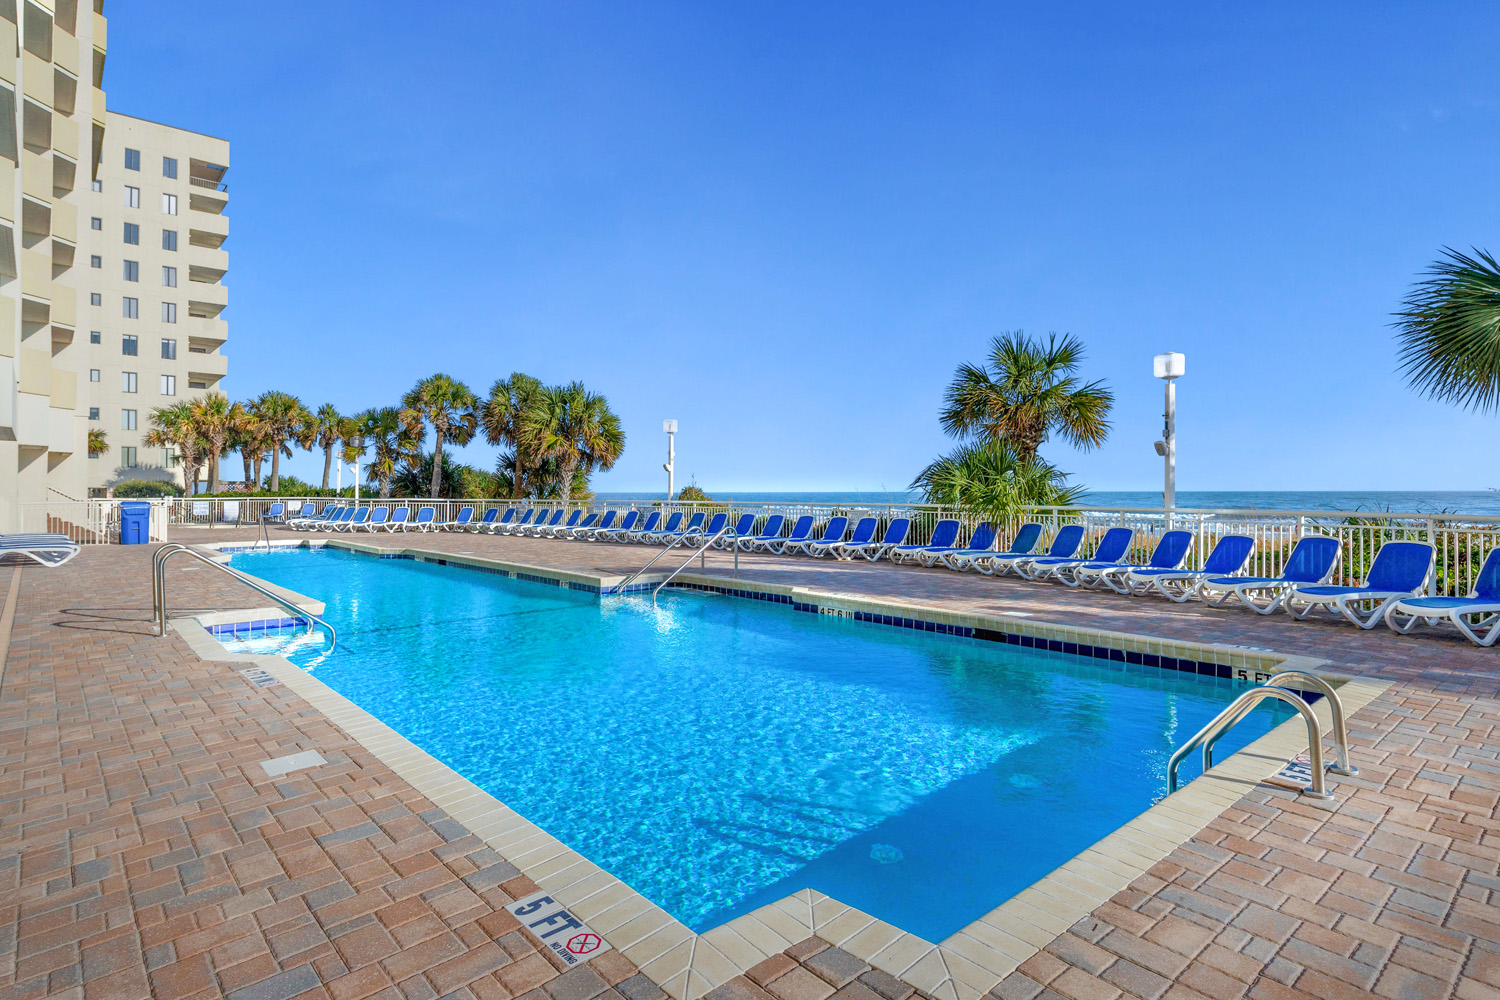 Bay Watch Resort and Conference Center- First Class North Myrtle Beach, SC  Hotels- GDS Reservation Codes: Travel Weekly